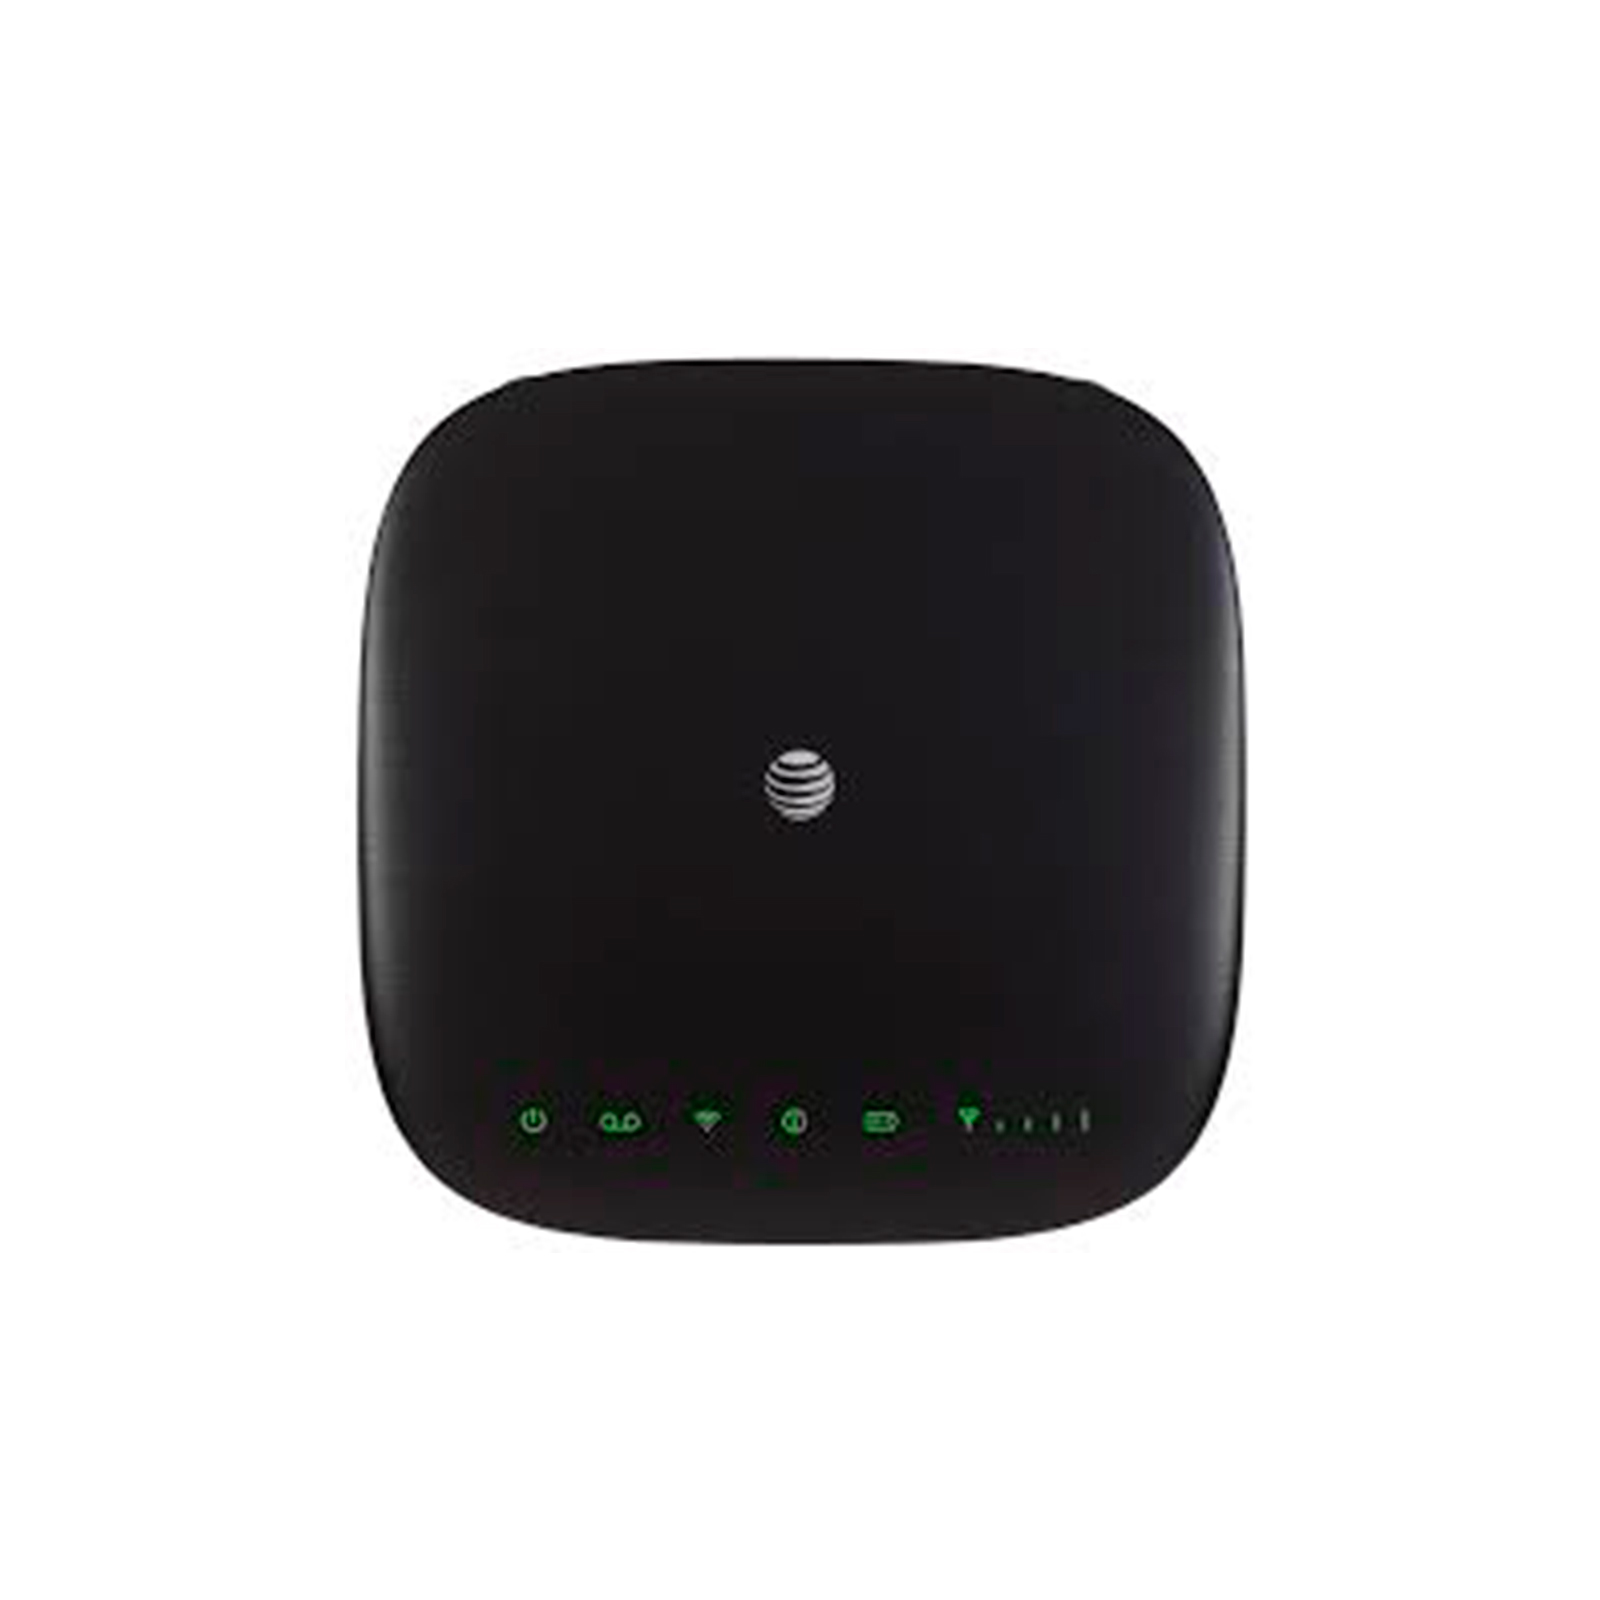 ROUTER LAN/WI-FI/4G LTE - 150Mbps Centinel GO